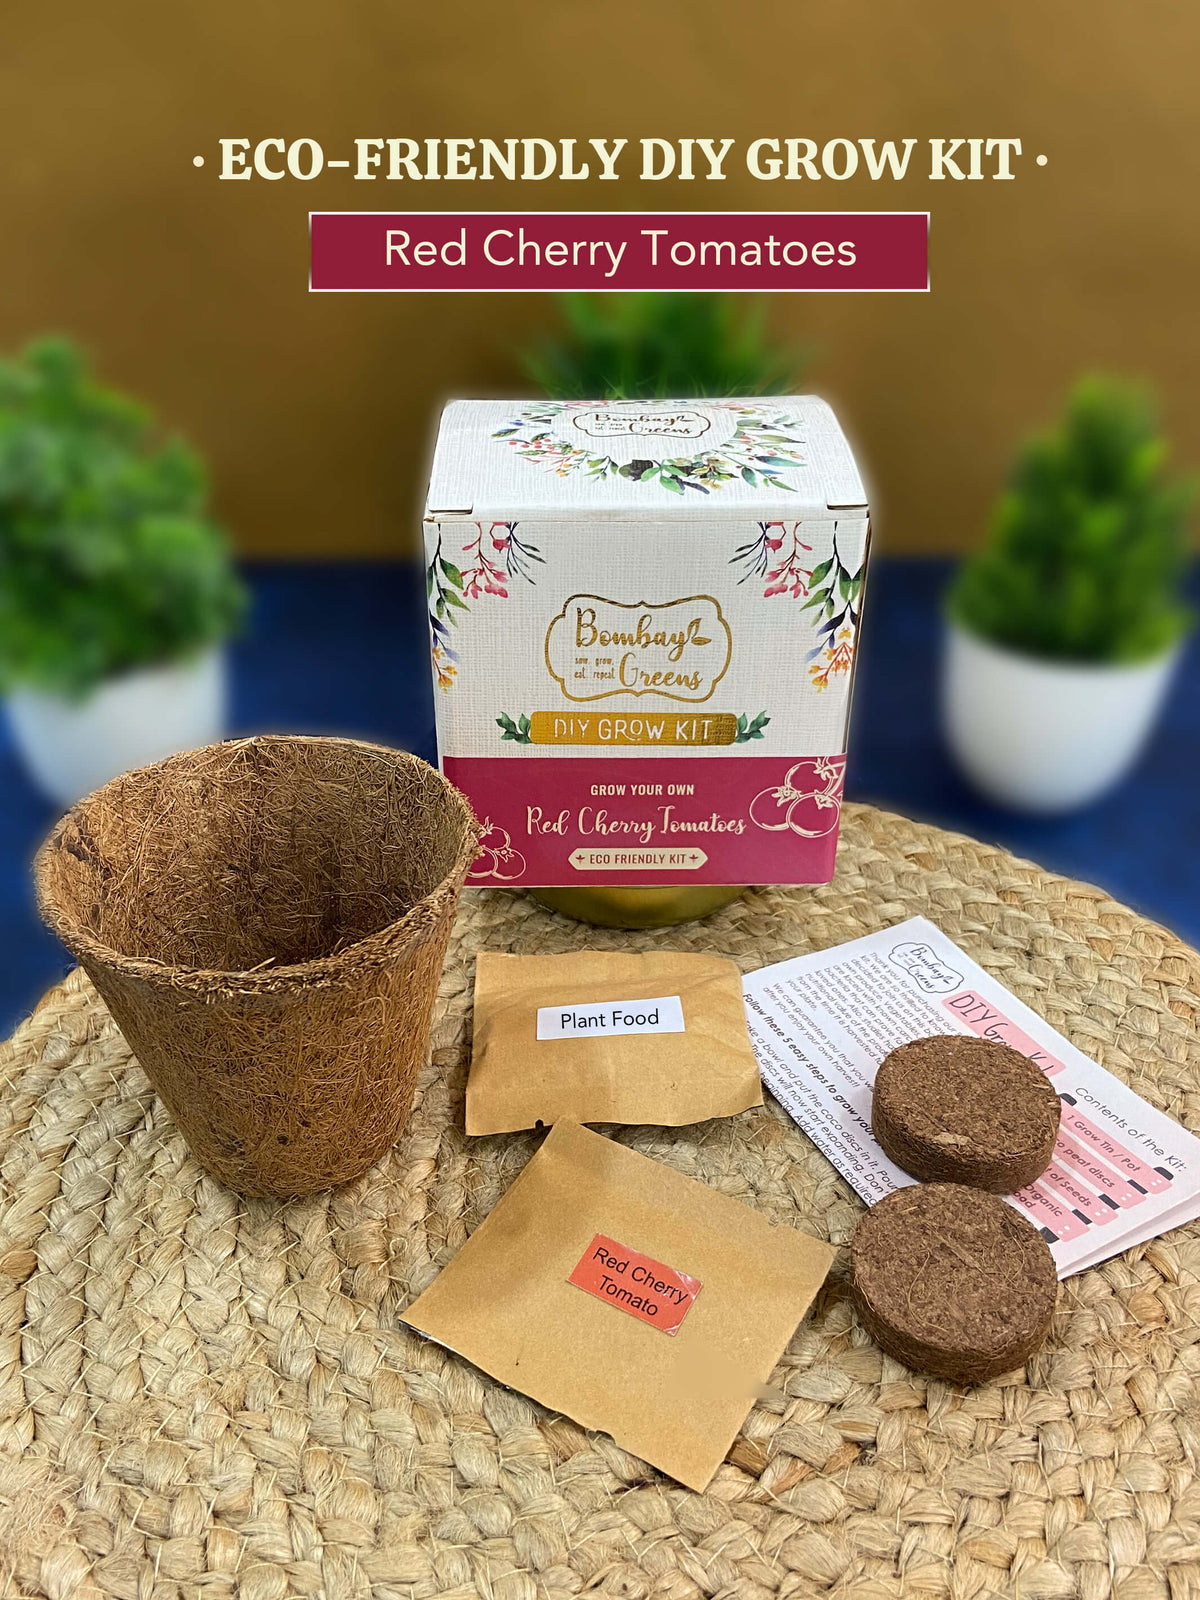 Eco-Friendly Grow Kit - Red Cherry Tomatoes